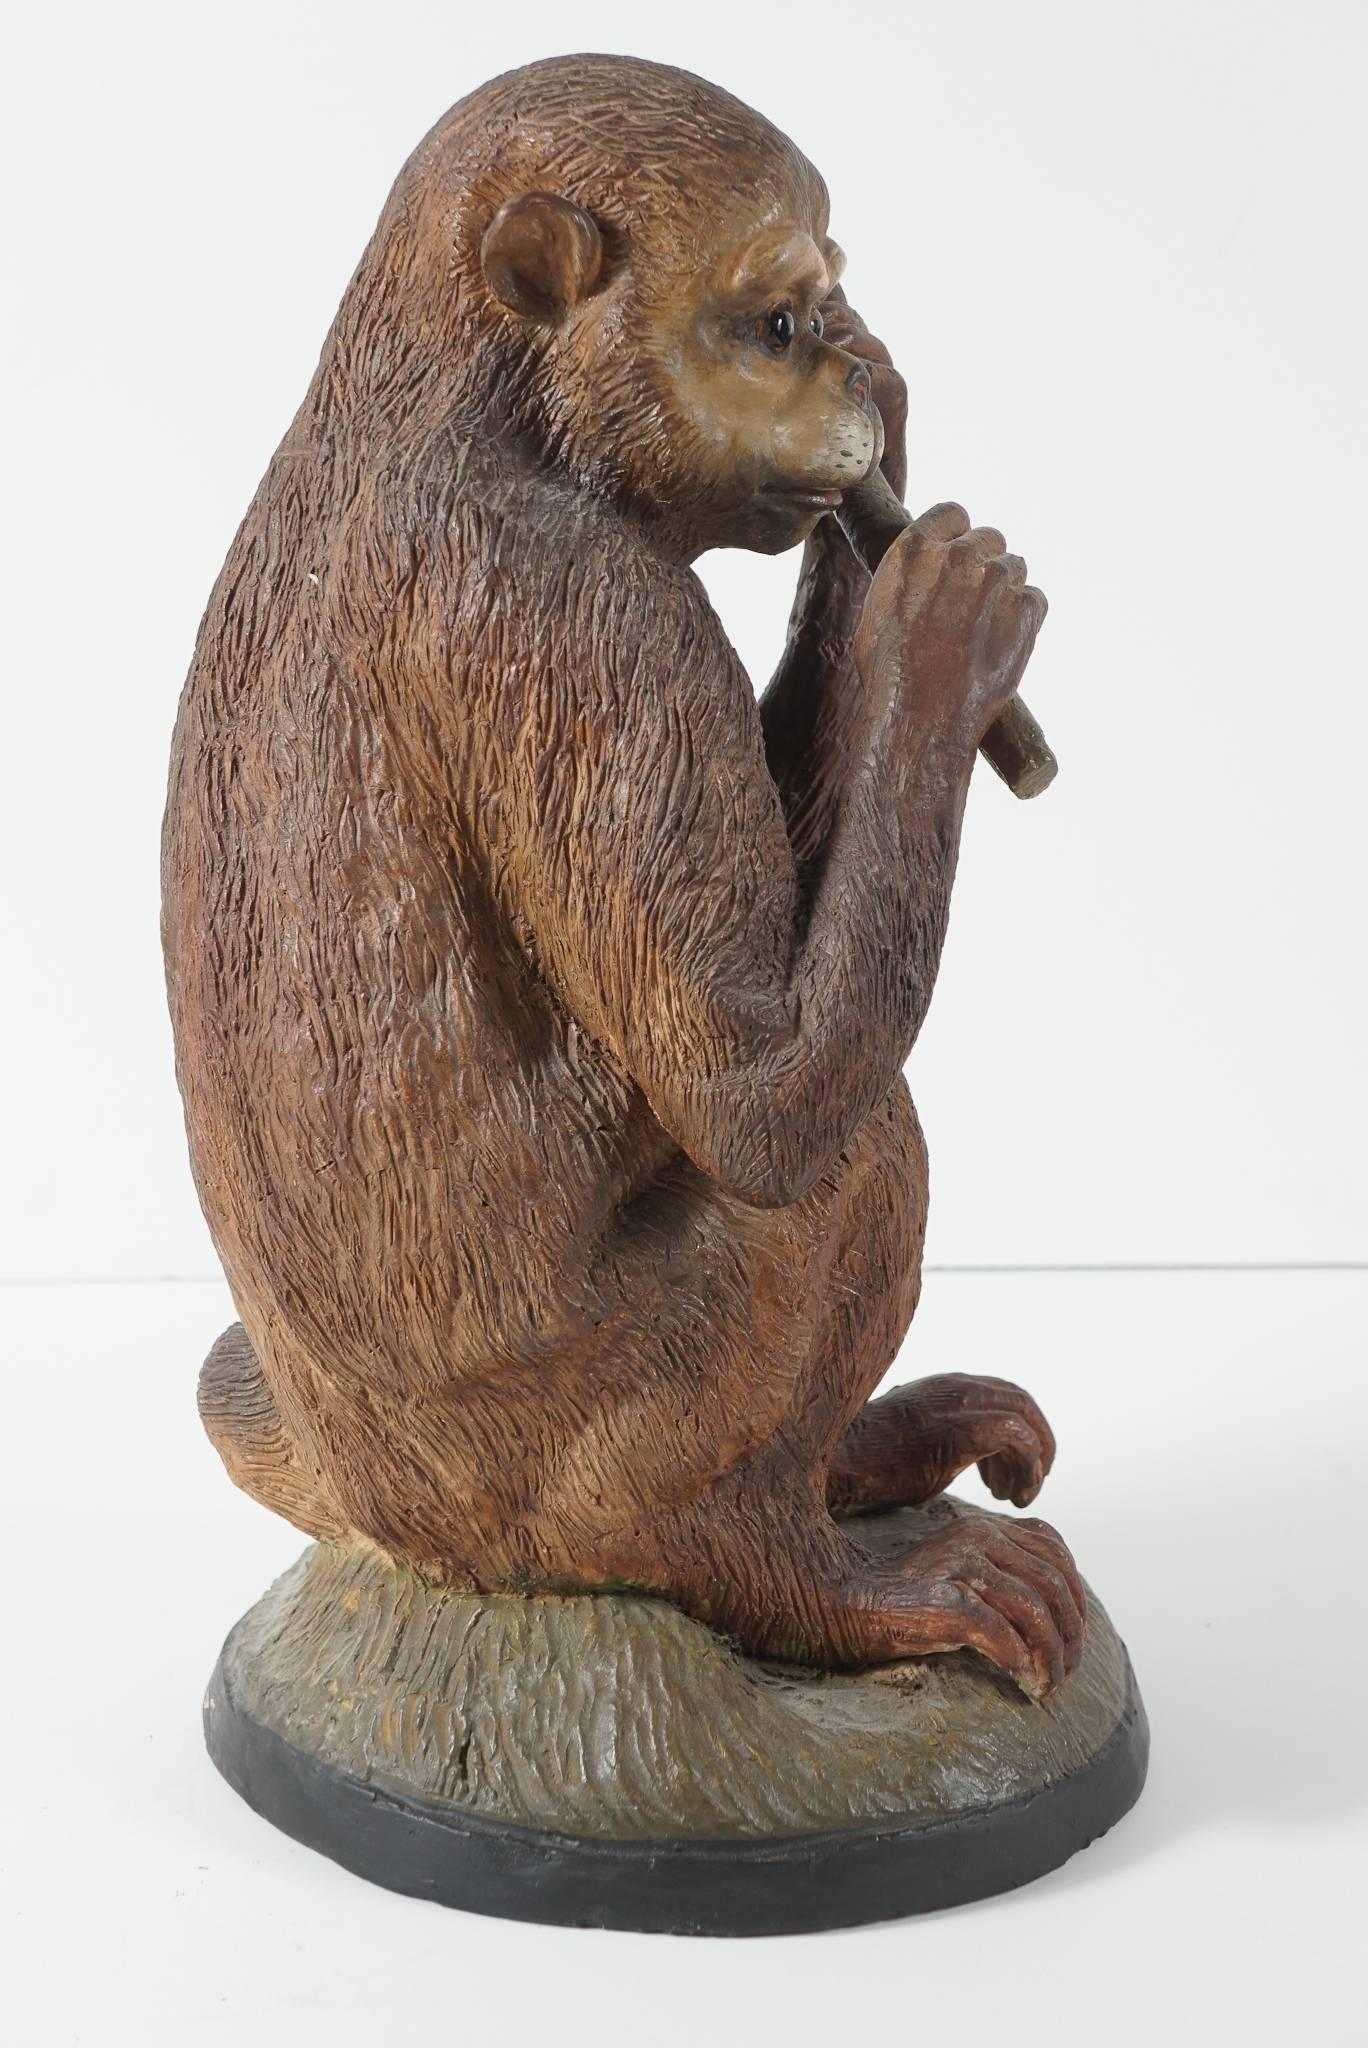 Blown Glass 19th Century French Painted Terracotta Monkey Sculpture with Inset Glass Eyes